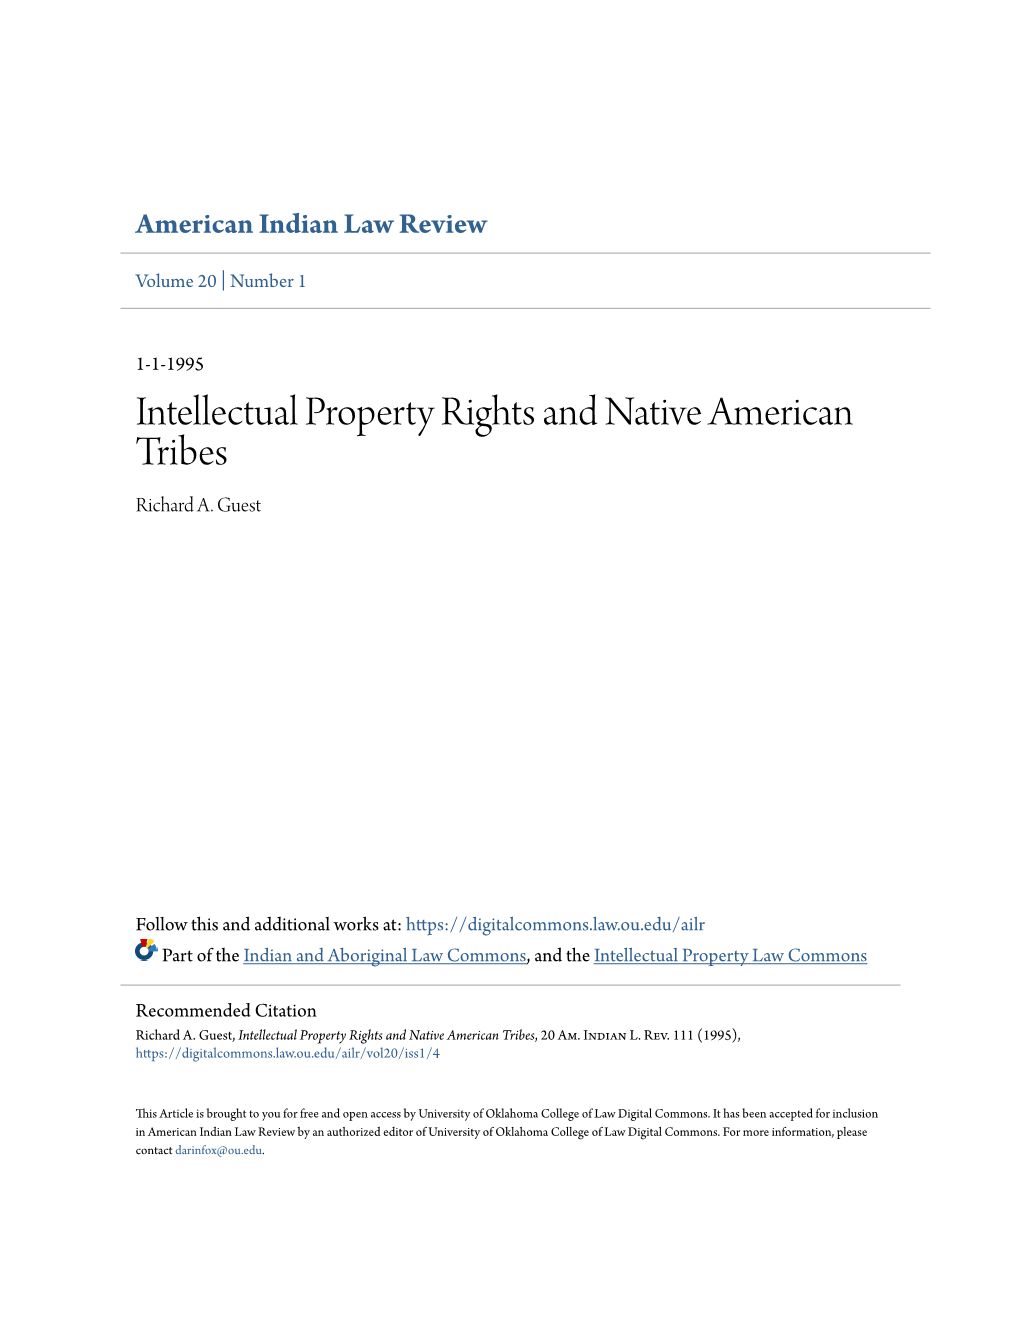 Intellectual Property Rights and Native American Tribes Richard A